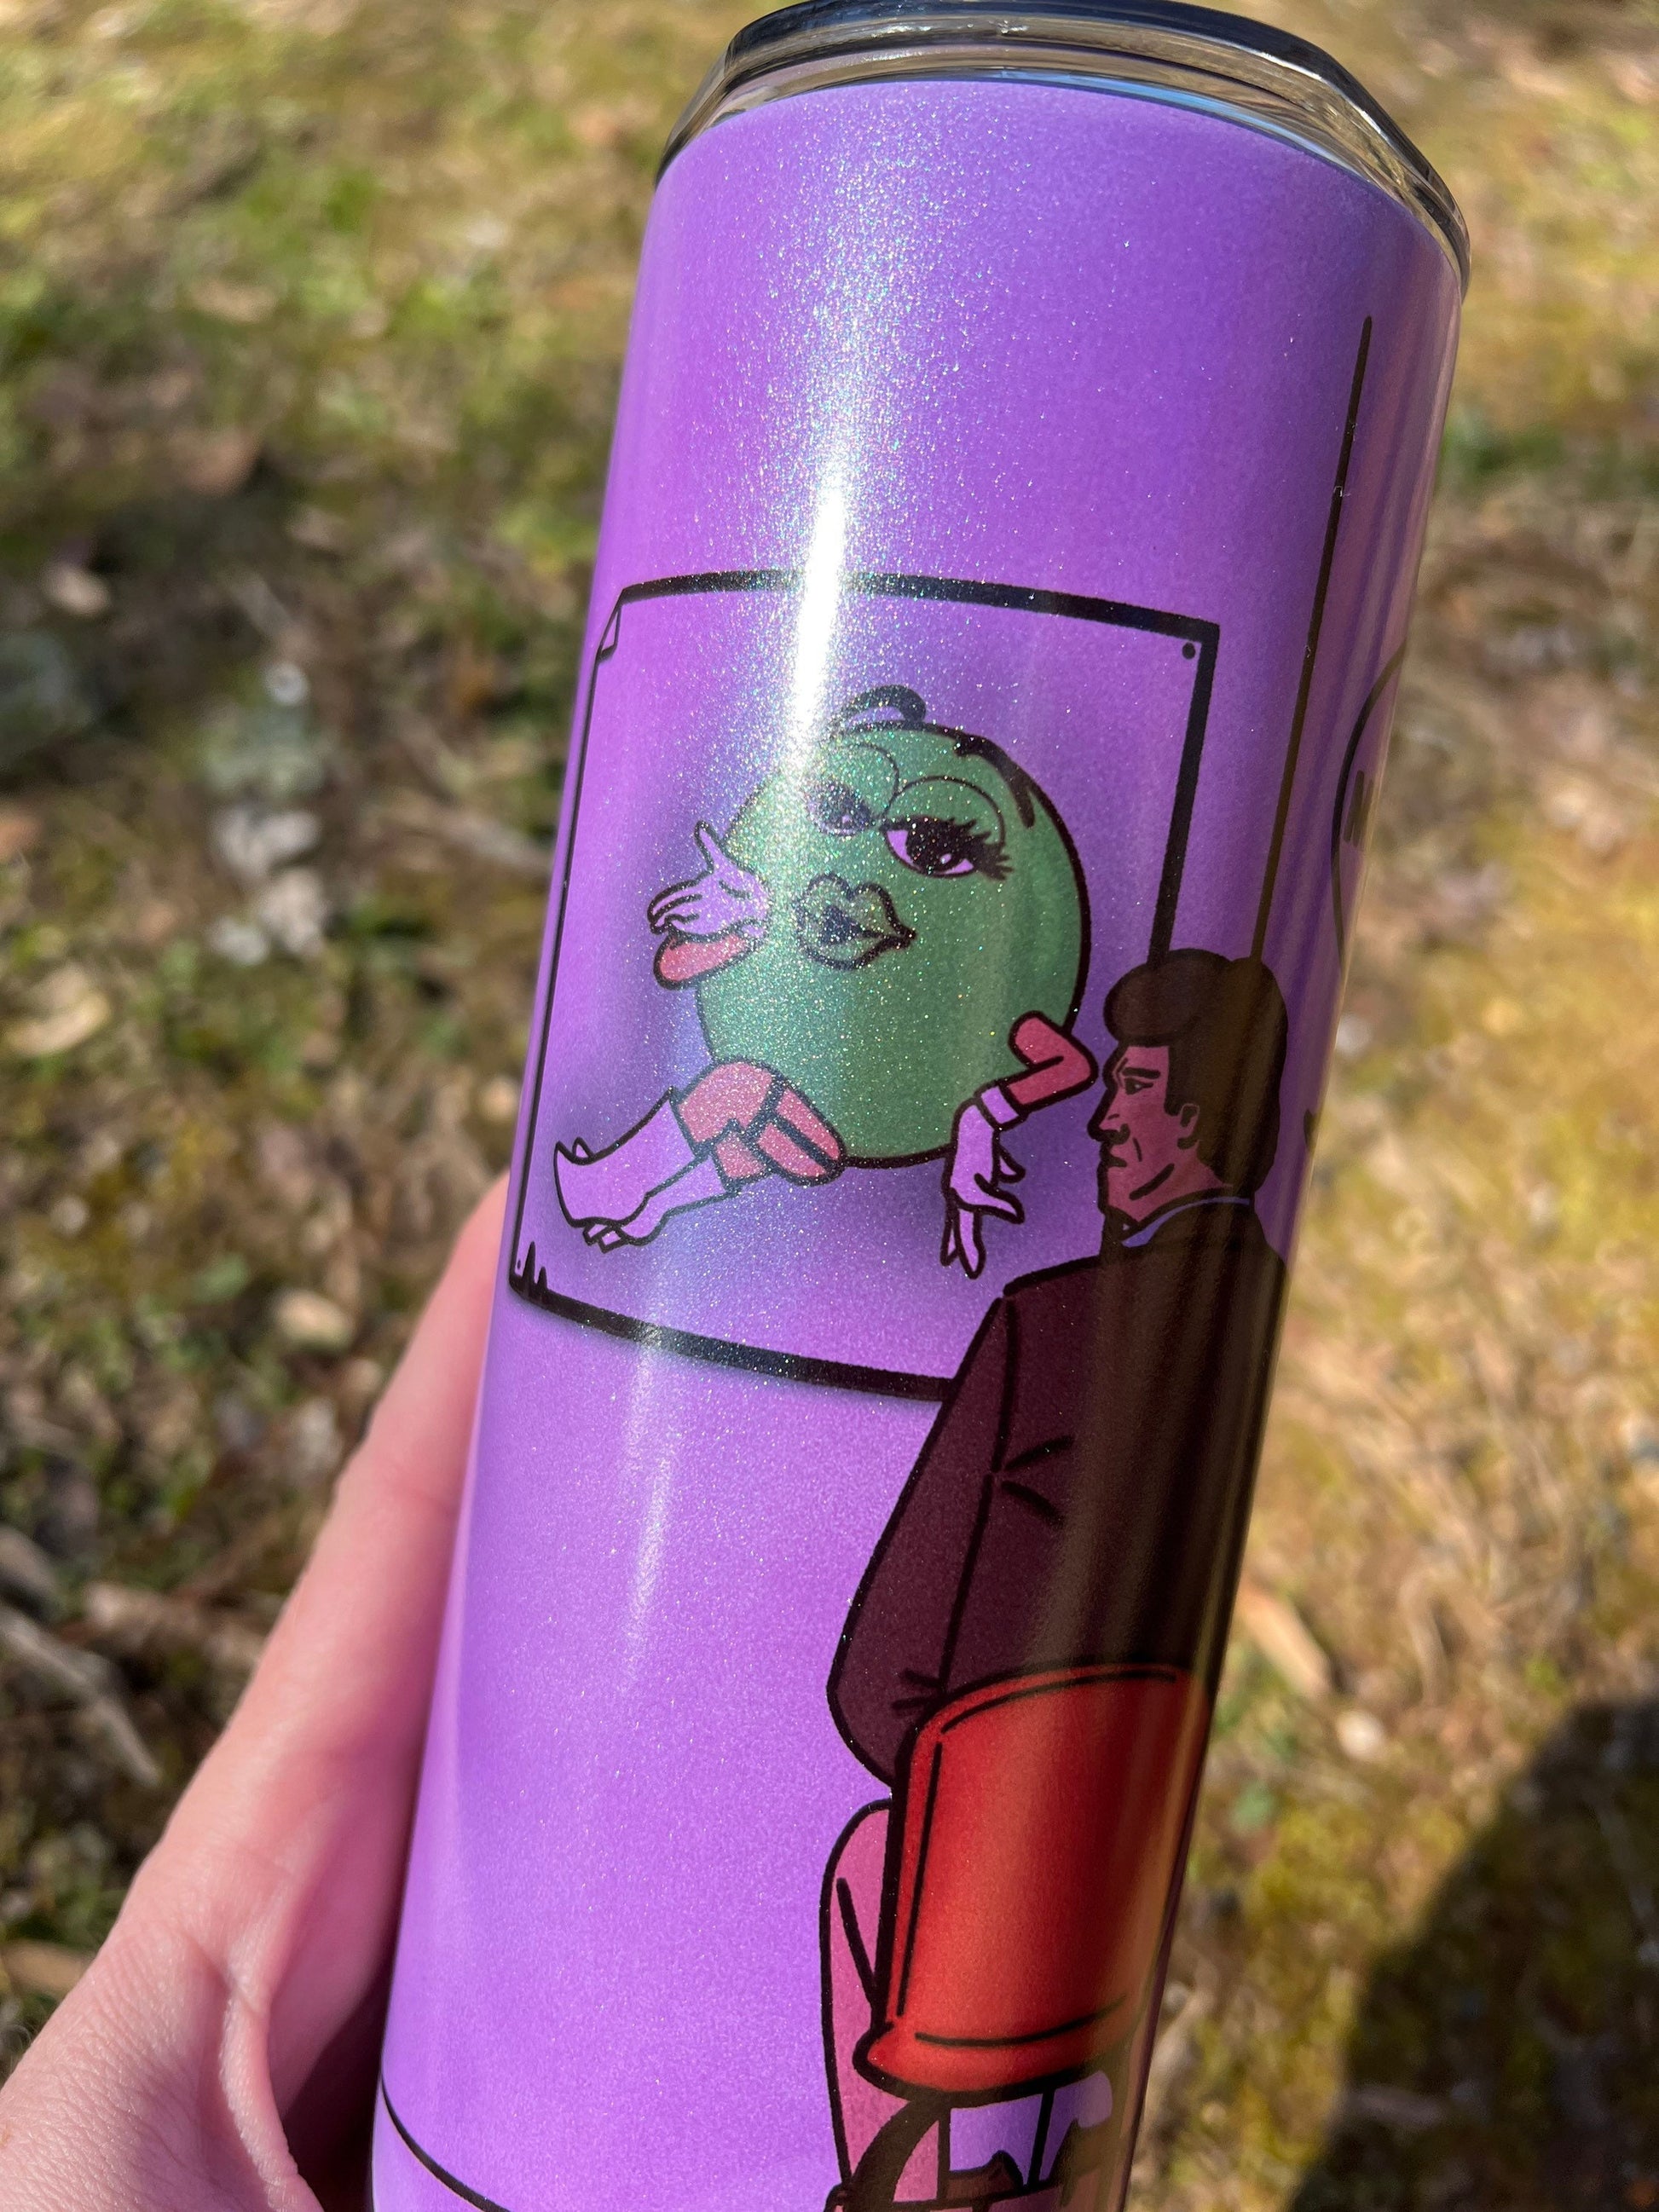 Tucker Melts in his Hands Color Changing Tumbler UV Glow in the Dark